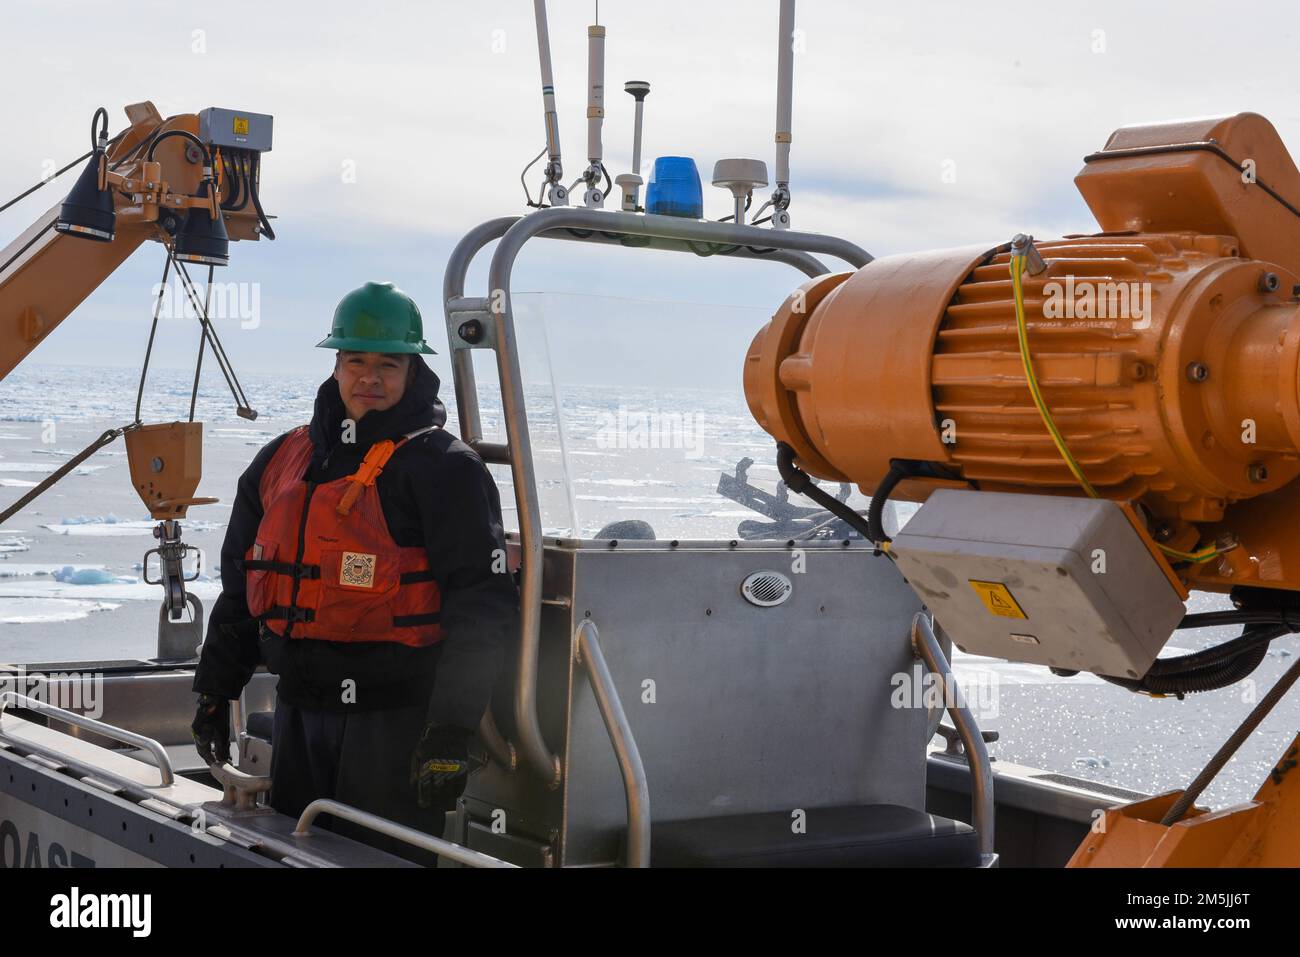 U.S. Coast Guard Petty Officer 3rd Class Adolfo Hernandez, a Machinery Technician aboard Coast Guard Cutter Spar, poses for a photo on the small boat after conducting checks while underway in the Atlantic Ocean, March 19, 2022. Spar and her crew are traveling to Duluth, Minn. after a year-long maintenance period in Baltimore. Stock Photo